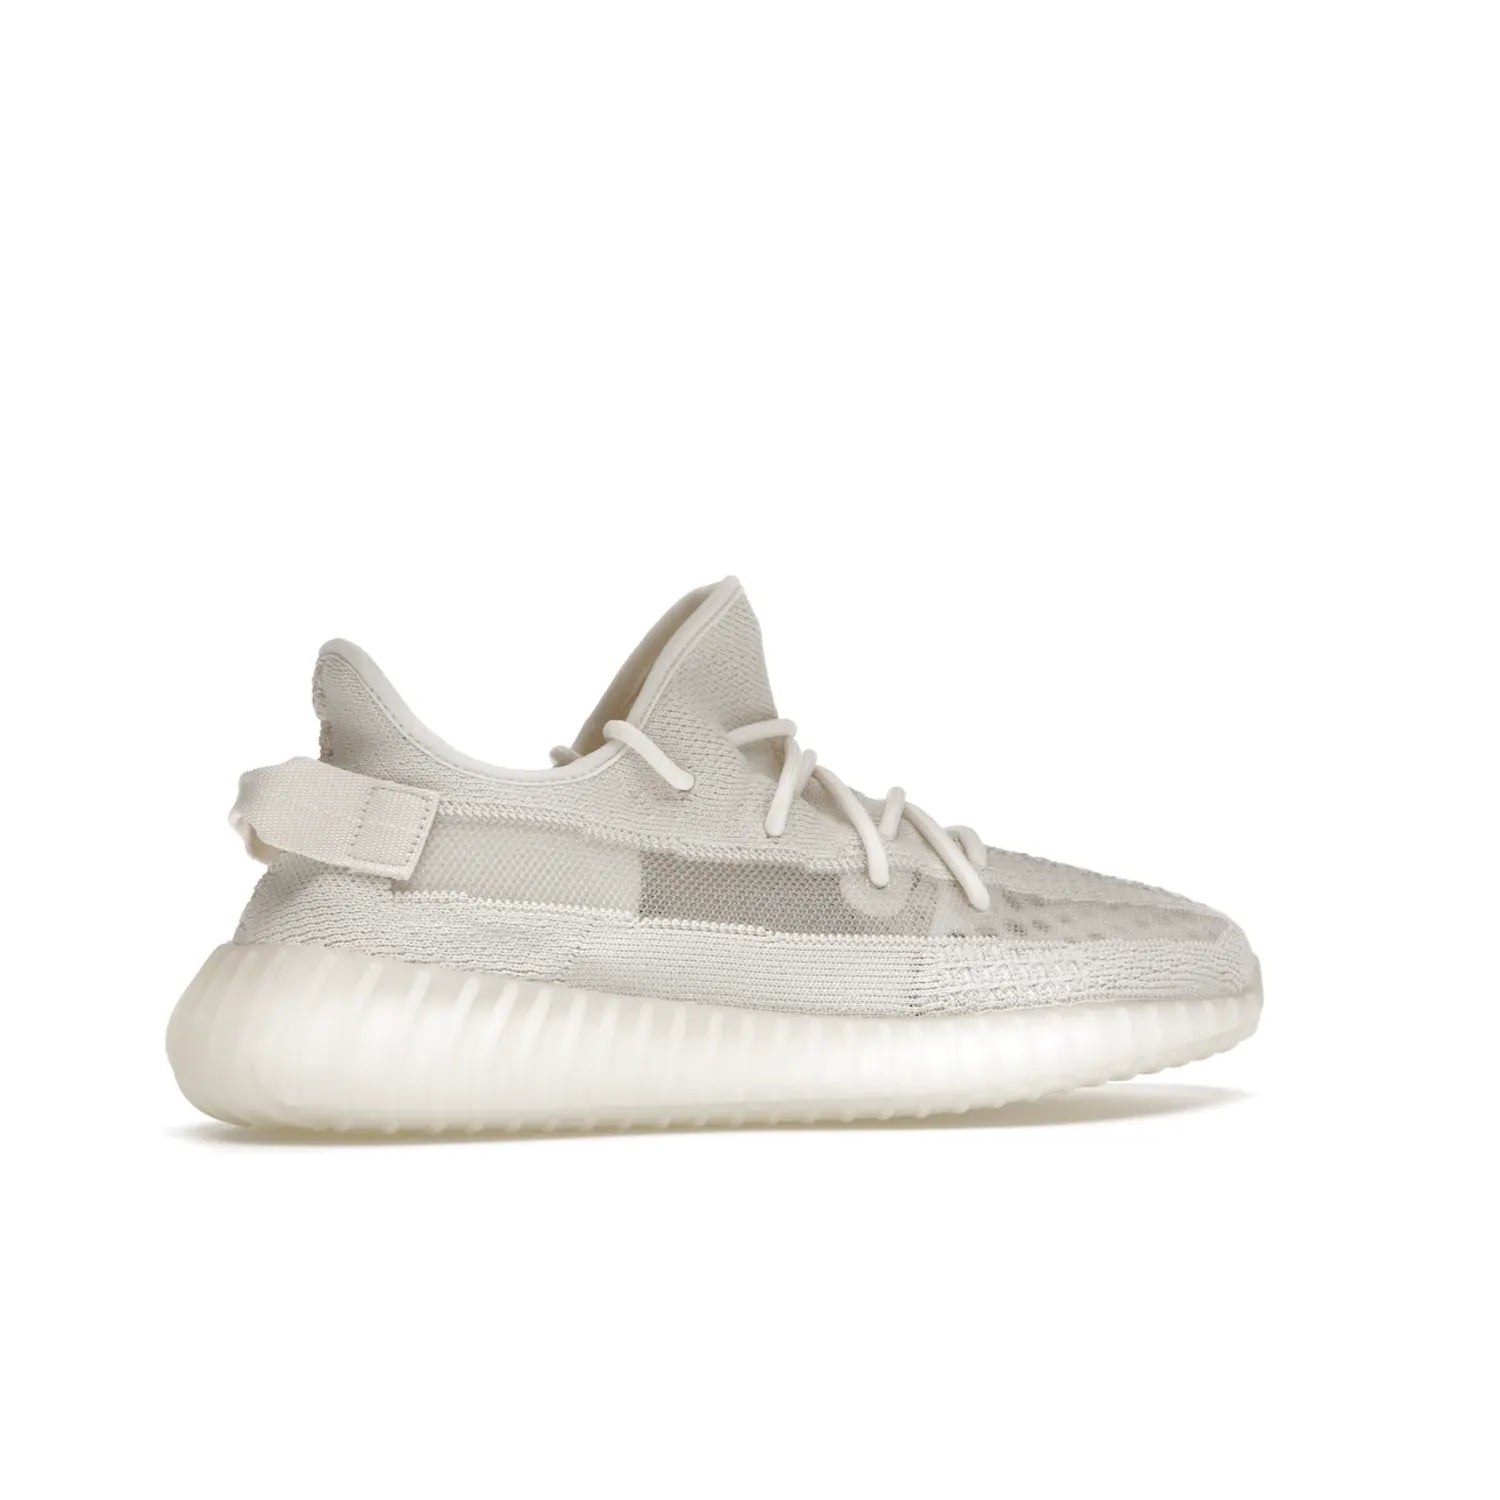 adidas Yeezy Boost 350 V2 Bone - Image 35 - Only at www.BallersClubKickz.com - Grab the stylish and comfortable adidas Yeezy Boost 350 V2 Bone in March 2022. This sneaker features a triple white Primeknit upper, mesh side stripes and canvas heel tabs, sitting atop a semi-translucent sole with Boost technology. Sure to keep your feet comfortable and stylish!